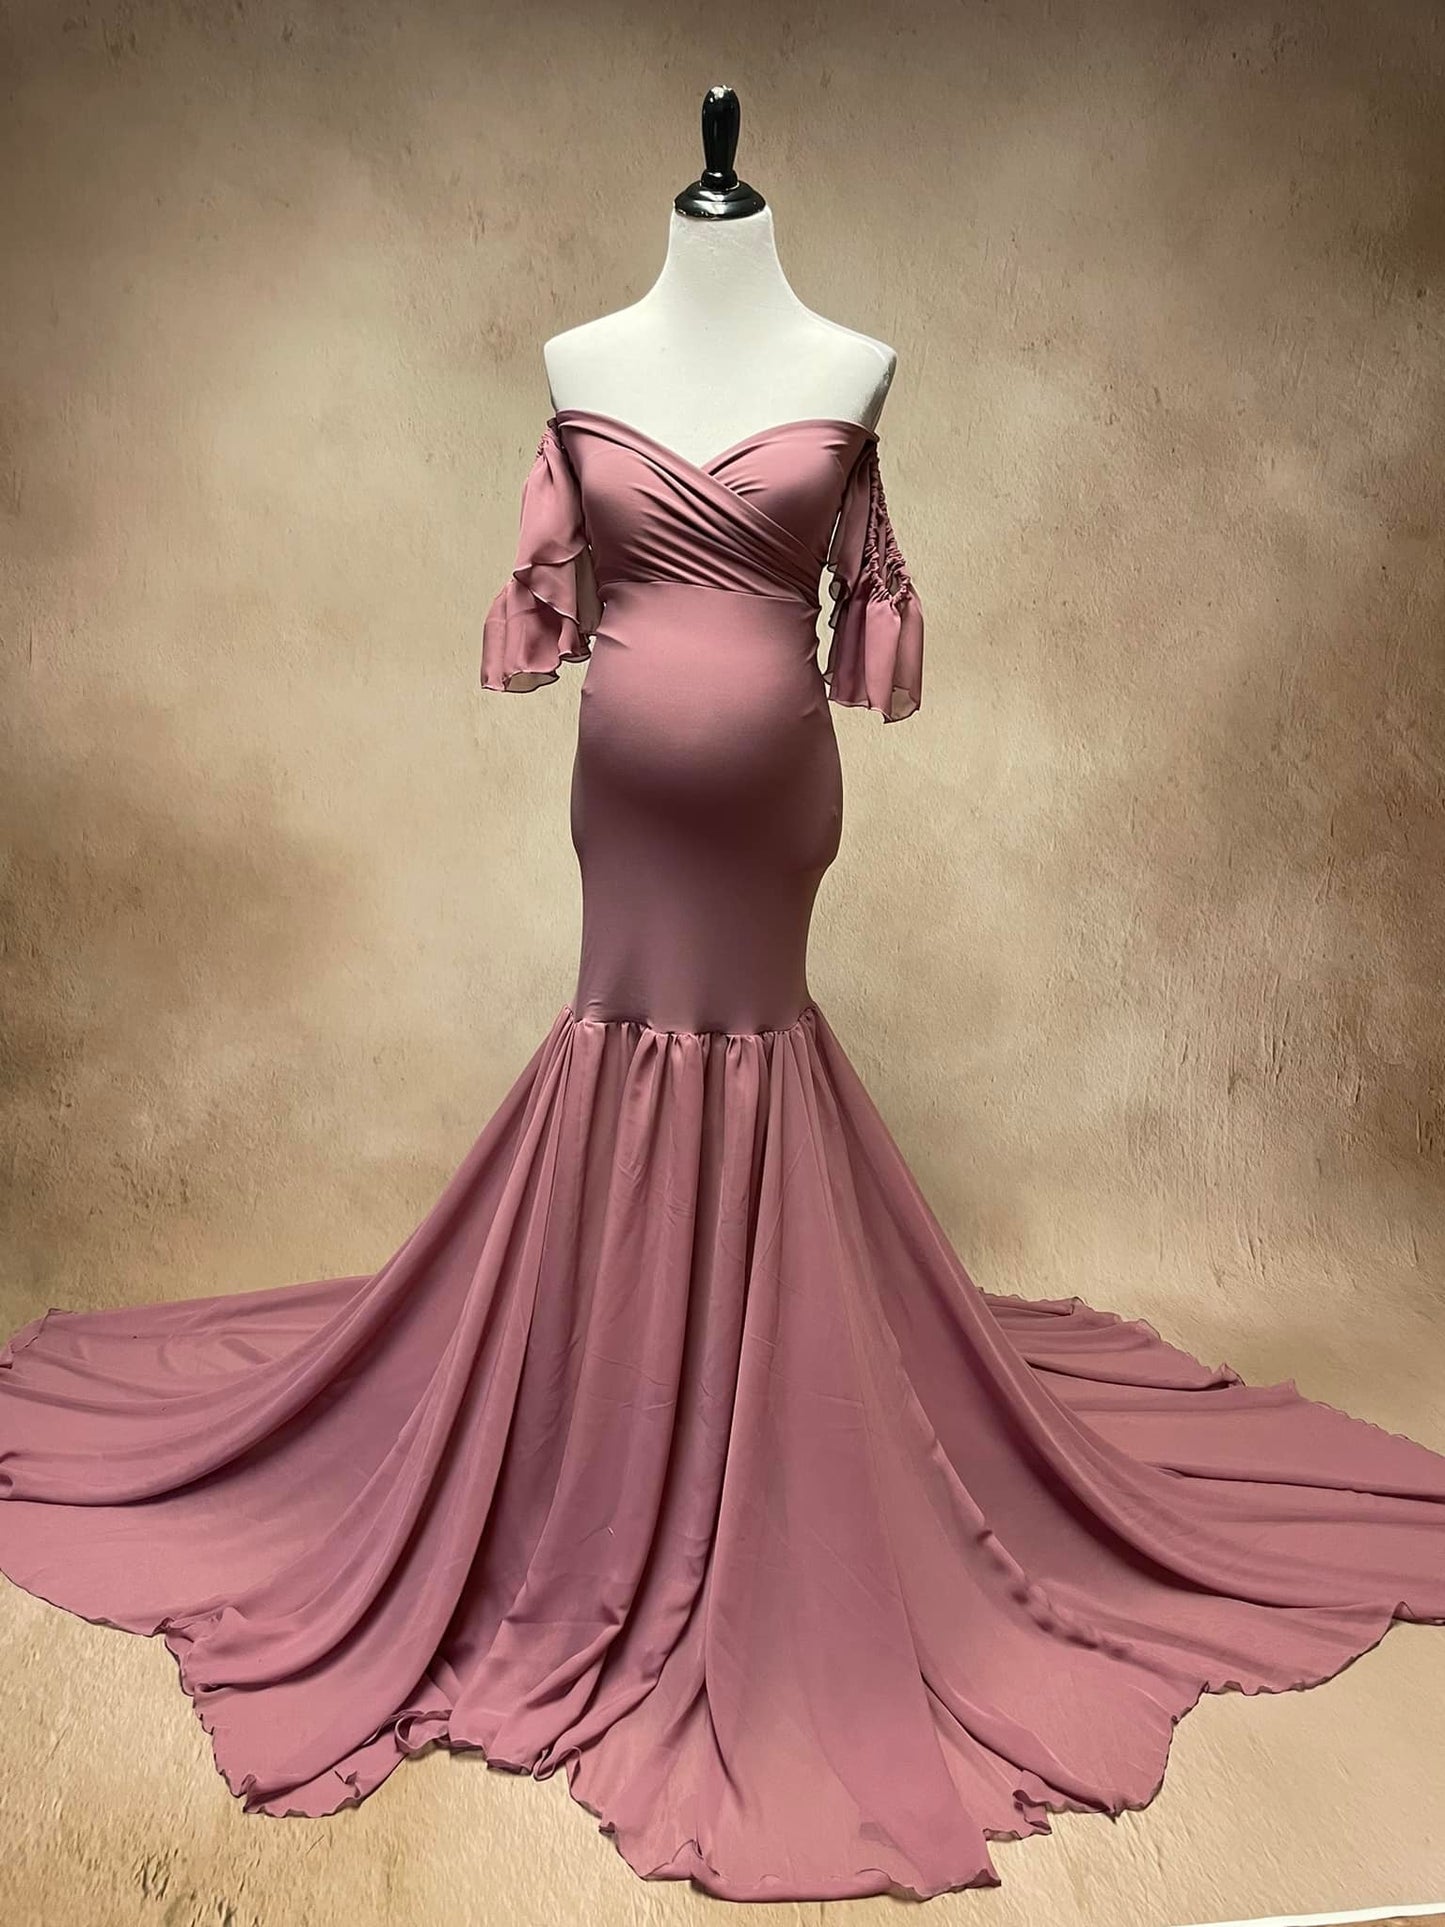 Mauve Pink Diantha Gown - maternity photoshoot dress